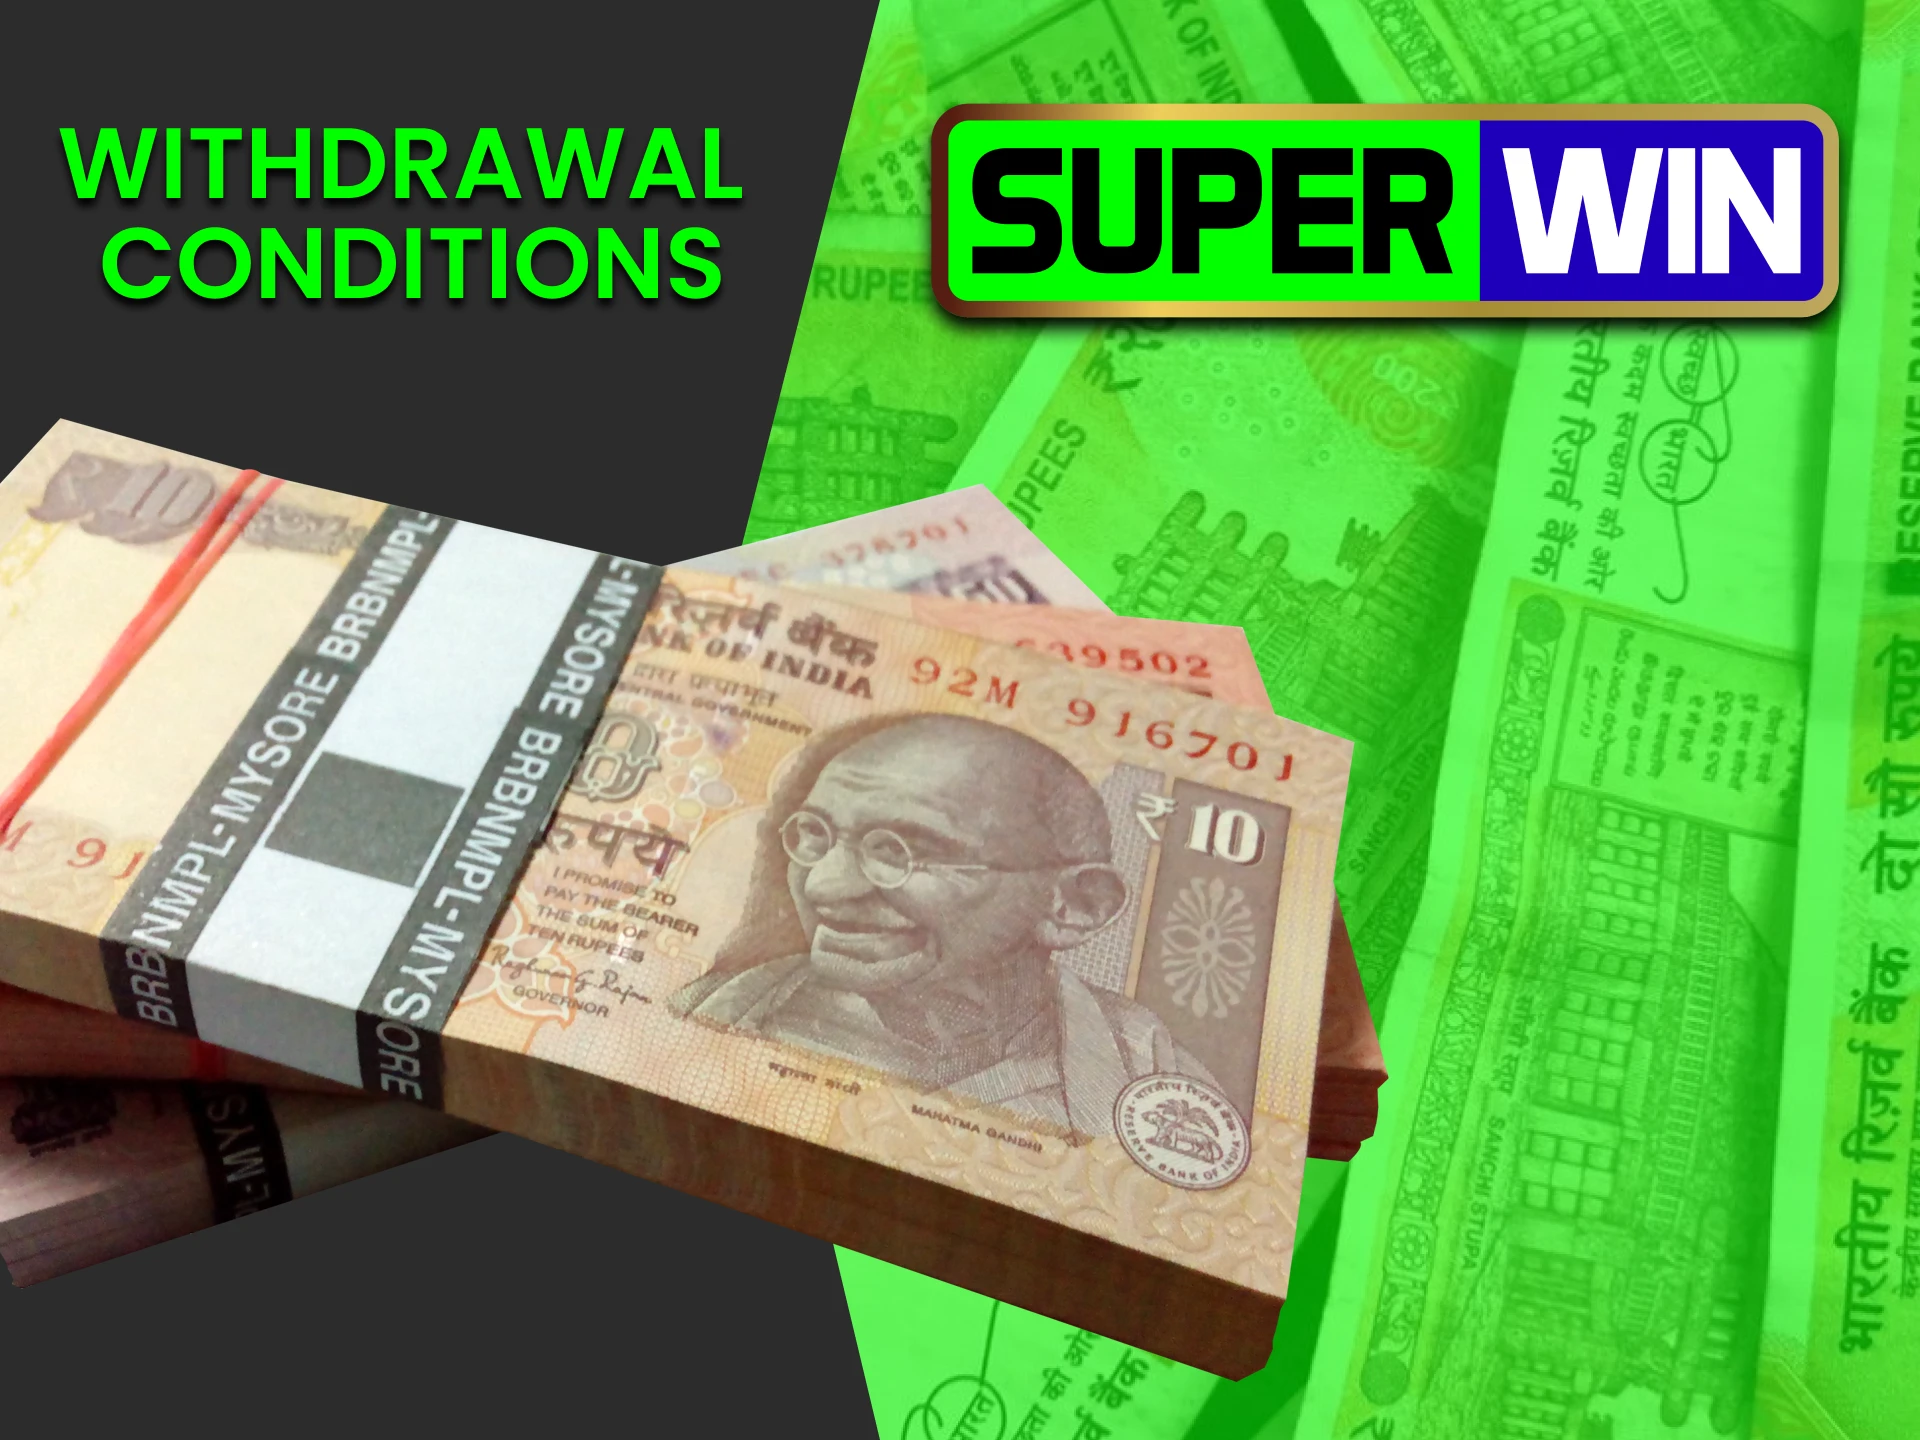 We will tell you about the conditions for withdrawing funds to Superwin.